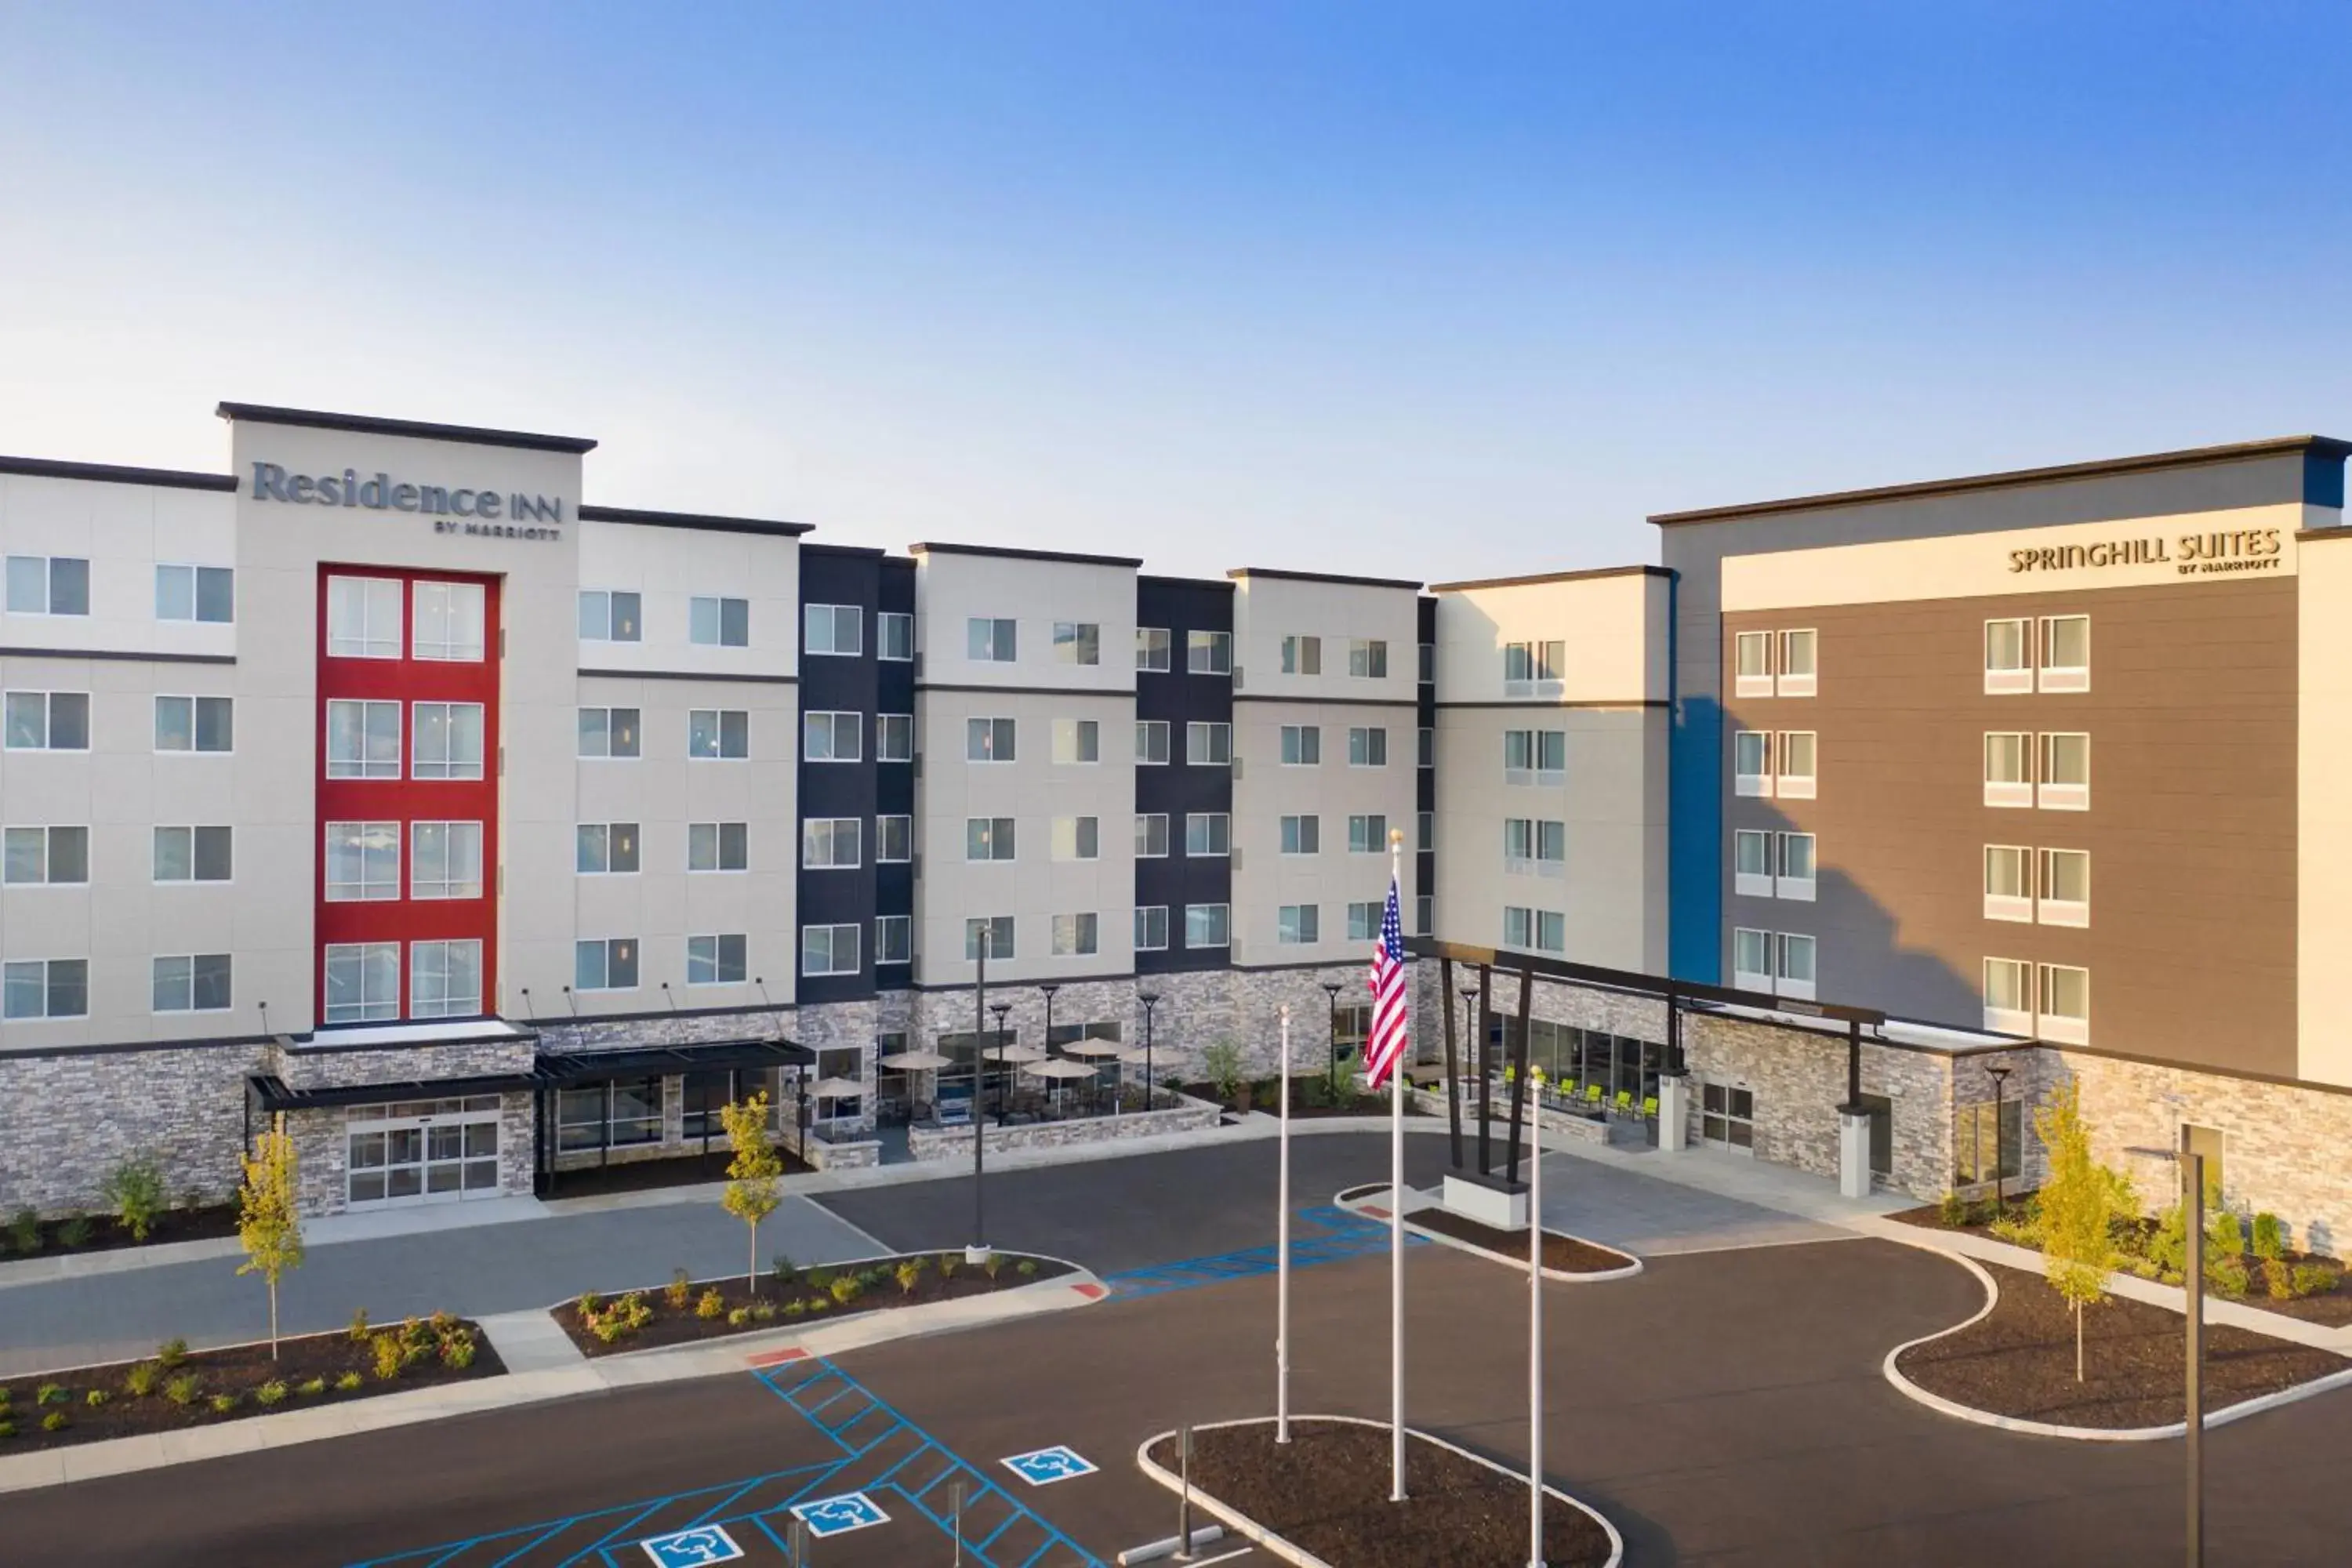 Property building in SpringHill Suites by Marriott Indianapolis Keystone